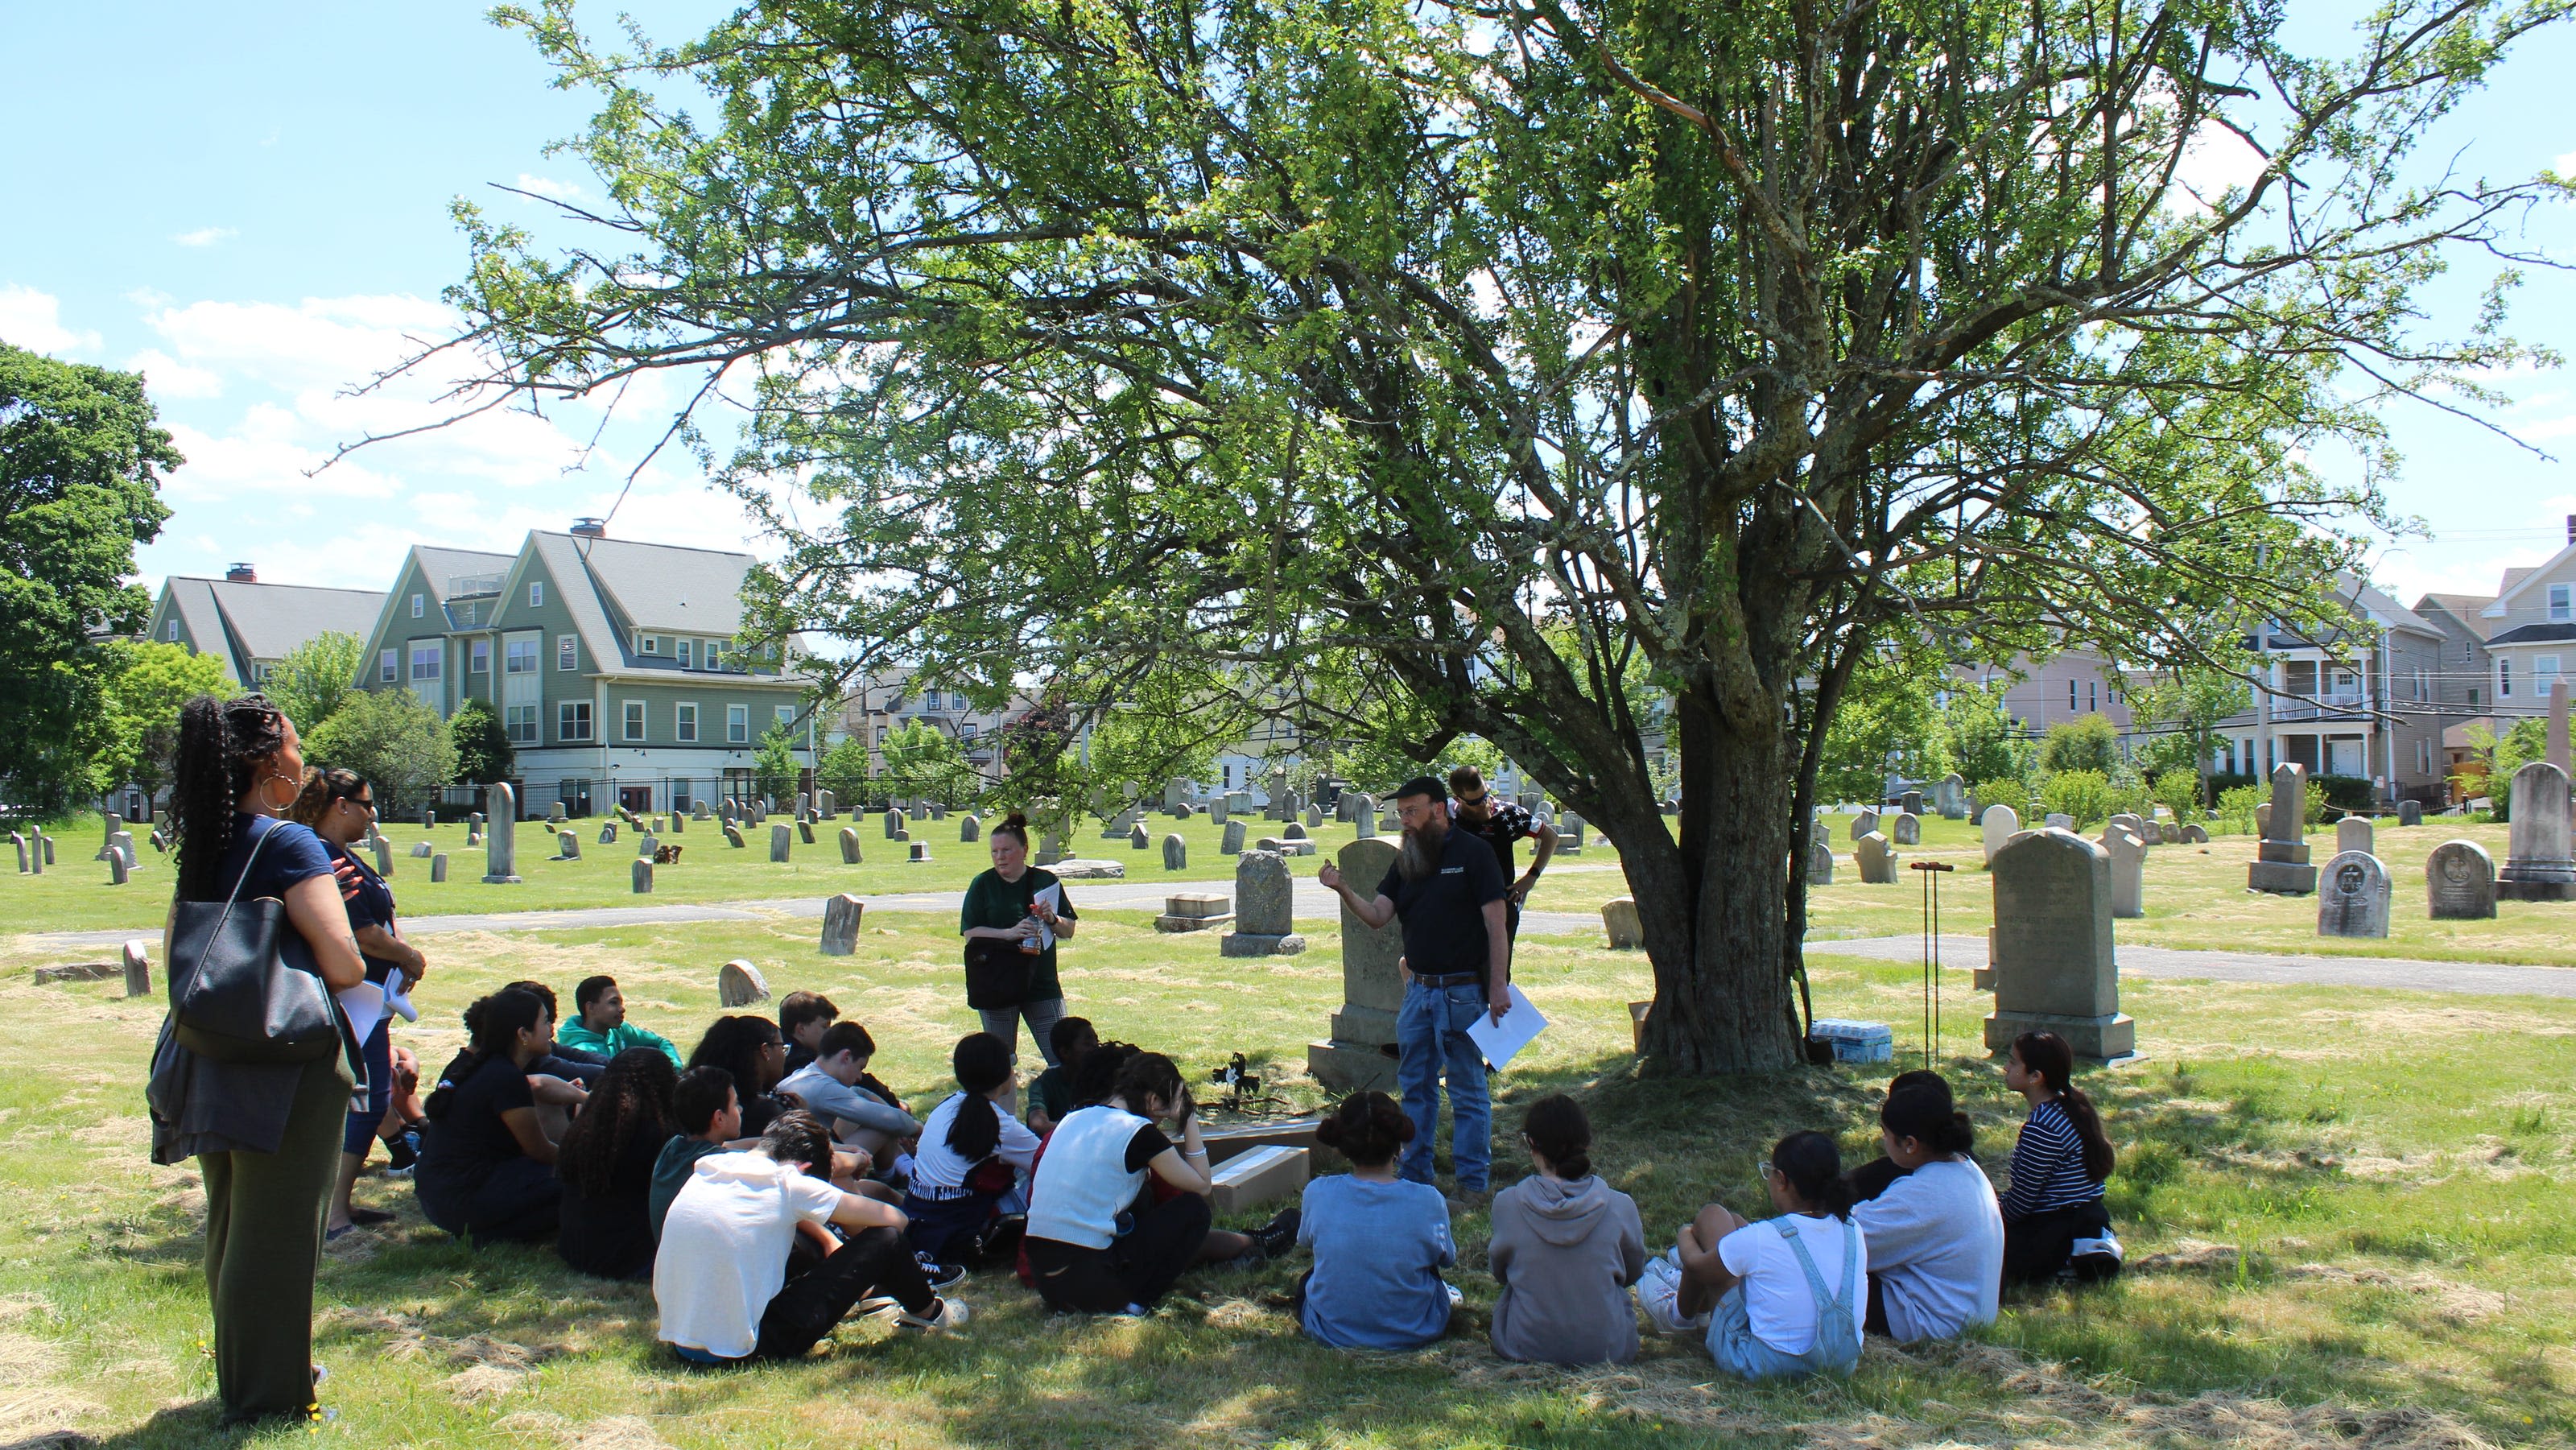 The Rev. Ken Postle explains the significance of the Civil War to a group of eighth-graders